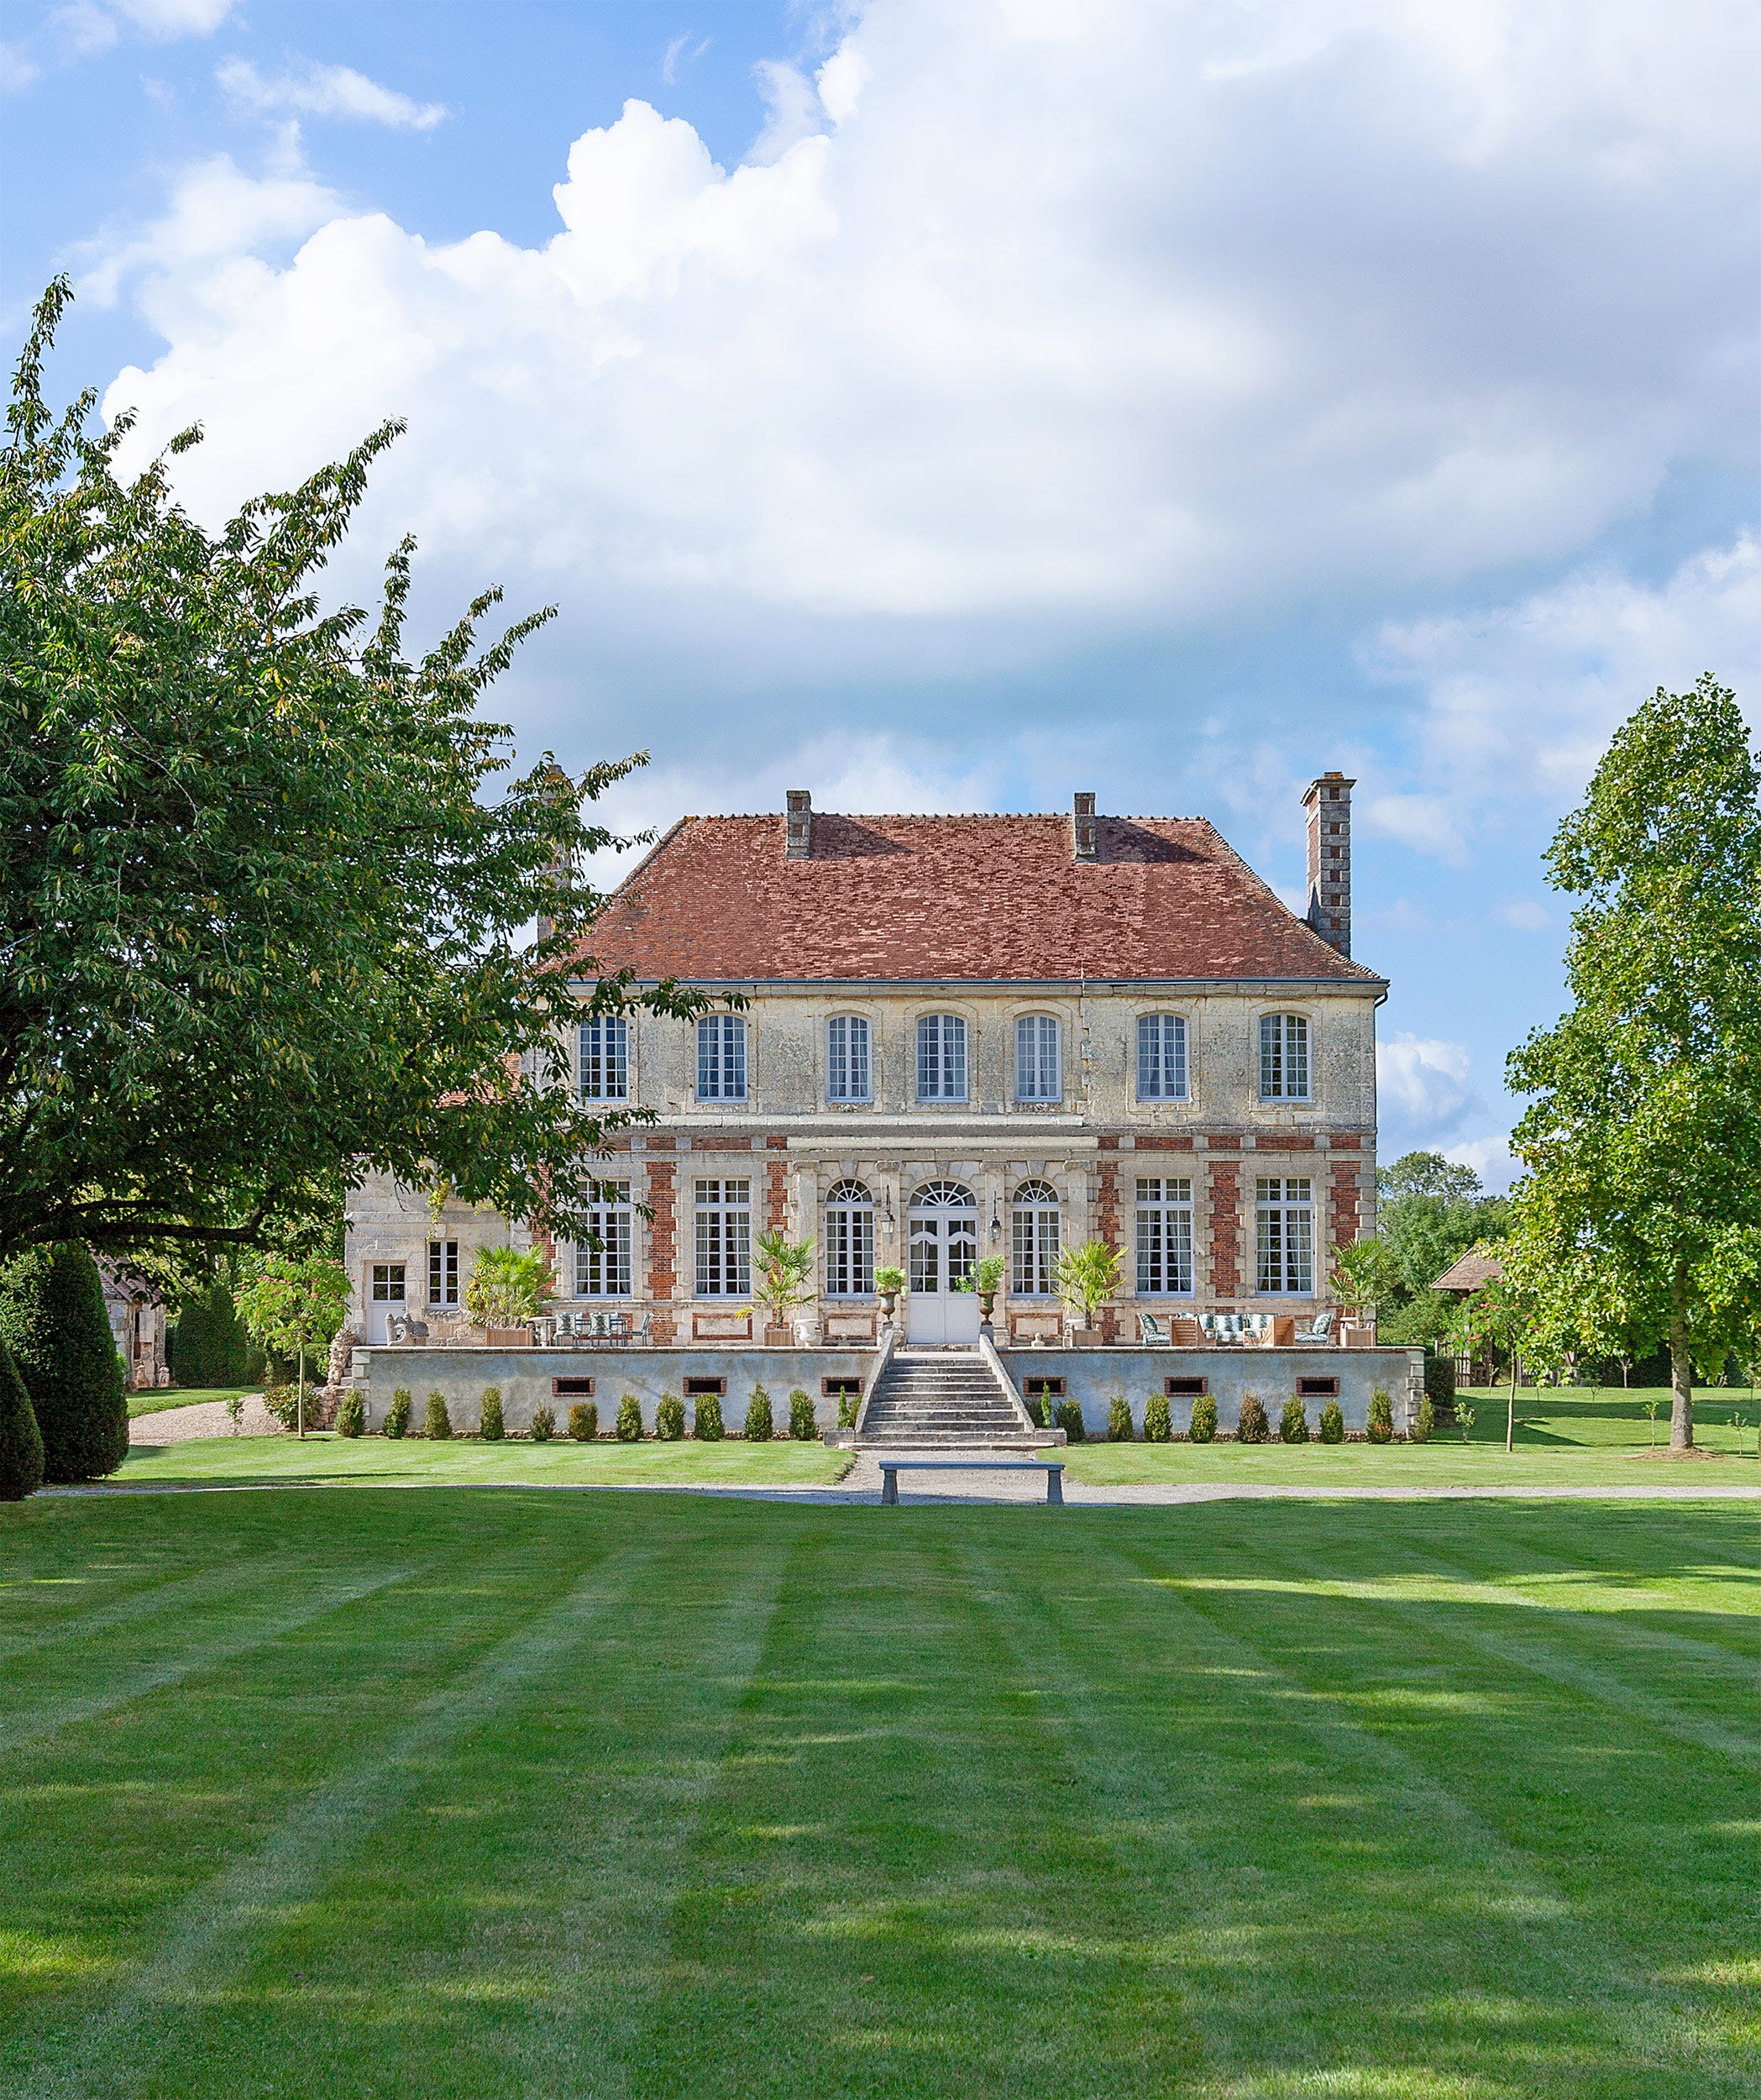 Where Does a Top Designer Spend His Summers? A 17th-Century French Manor, Of Course!